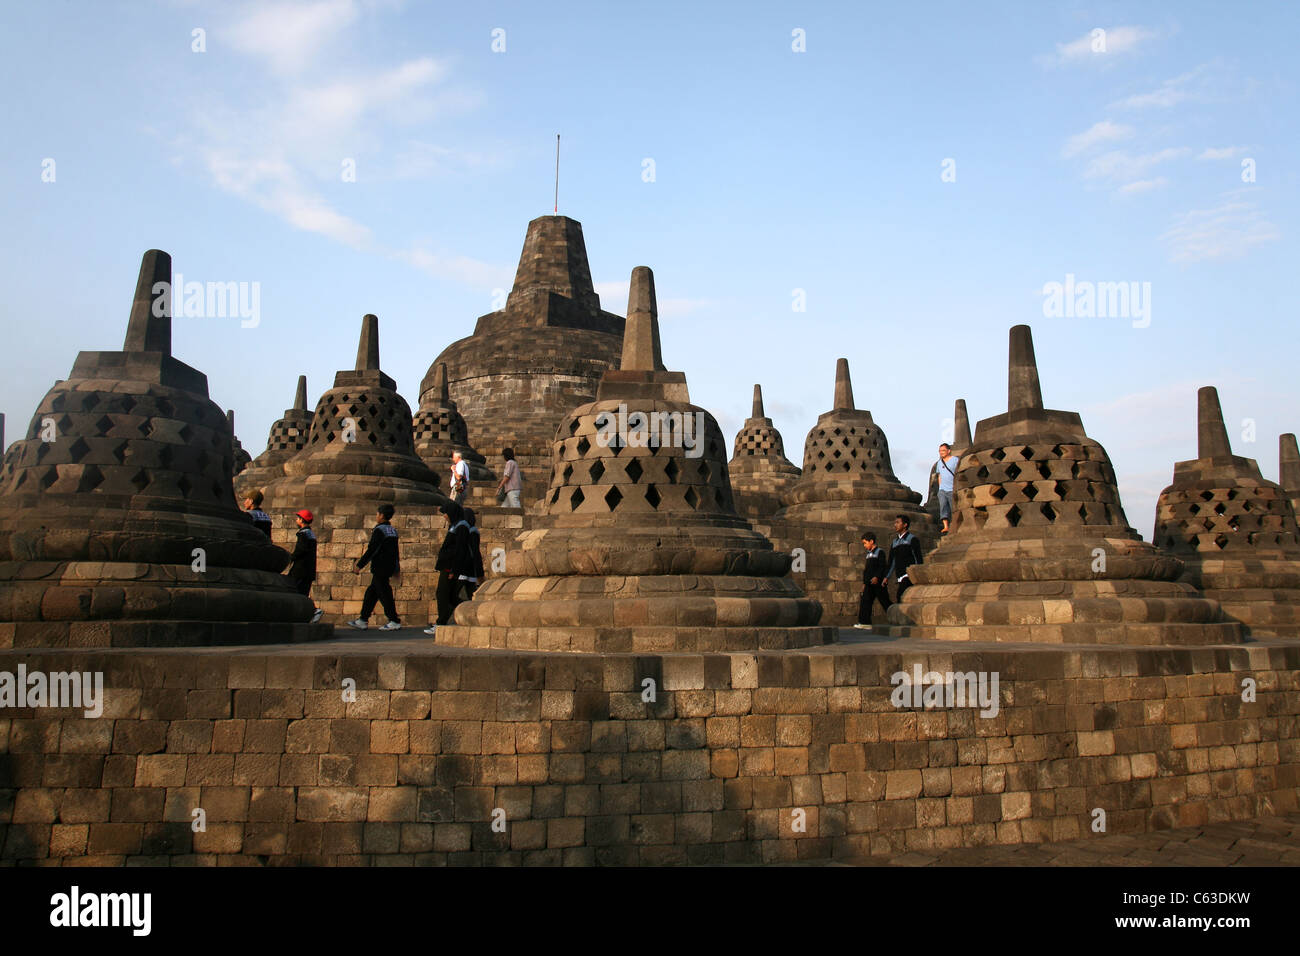 The central stupa and terraces of Borobudur, the largest Buddhist temple in Indonesia. Yogyakarta, Java, Indonesia Stock Photo